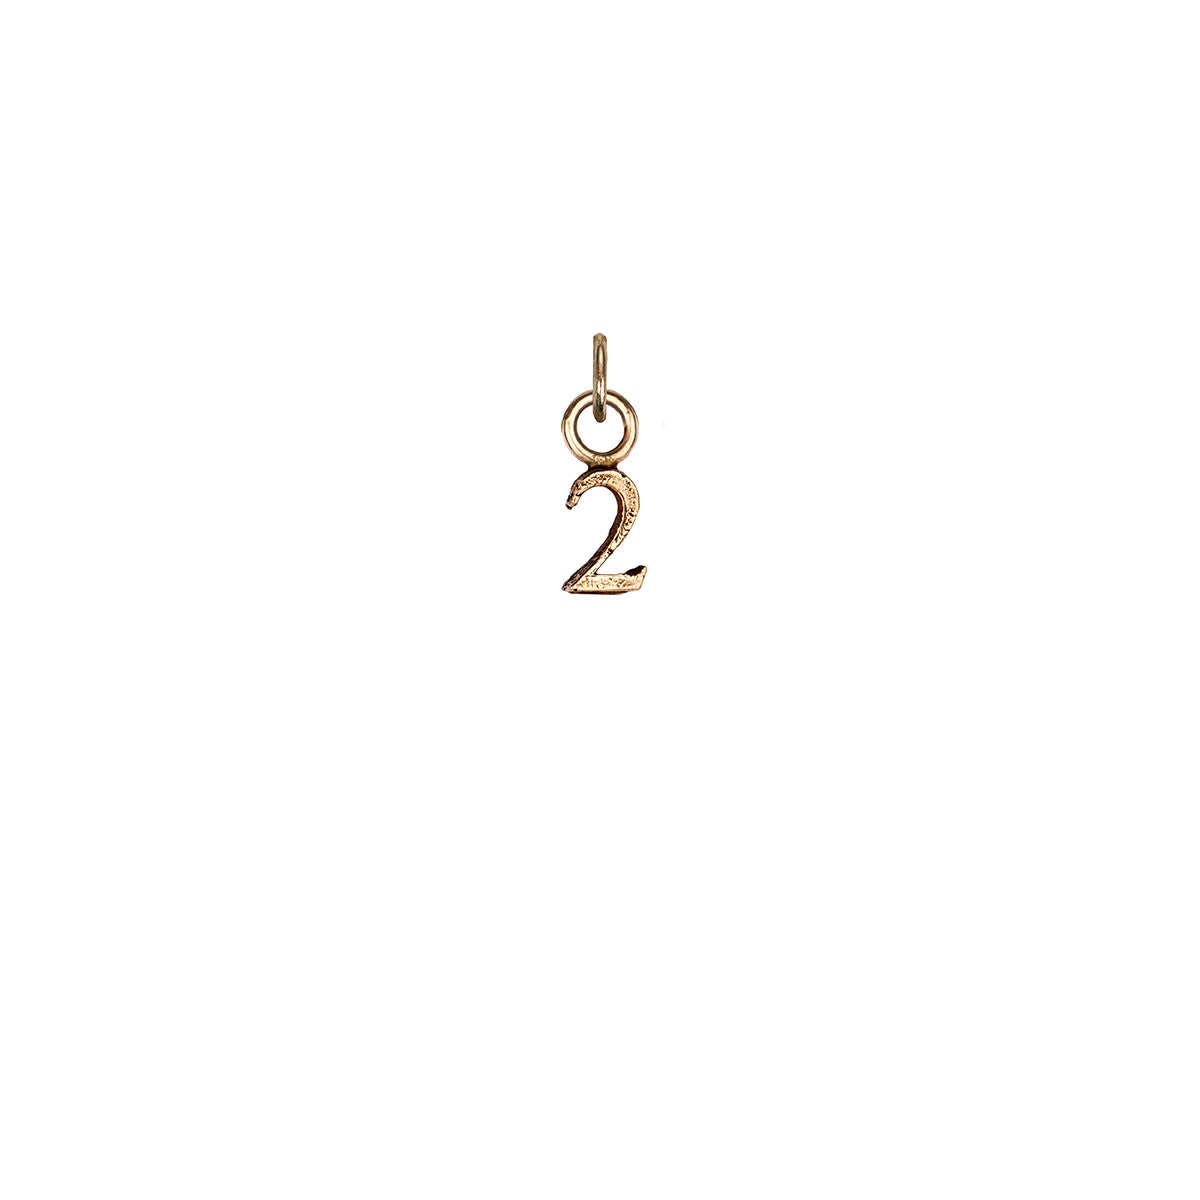 A 14k gold charm in the shape of the number two.